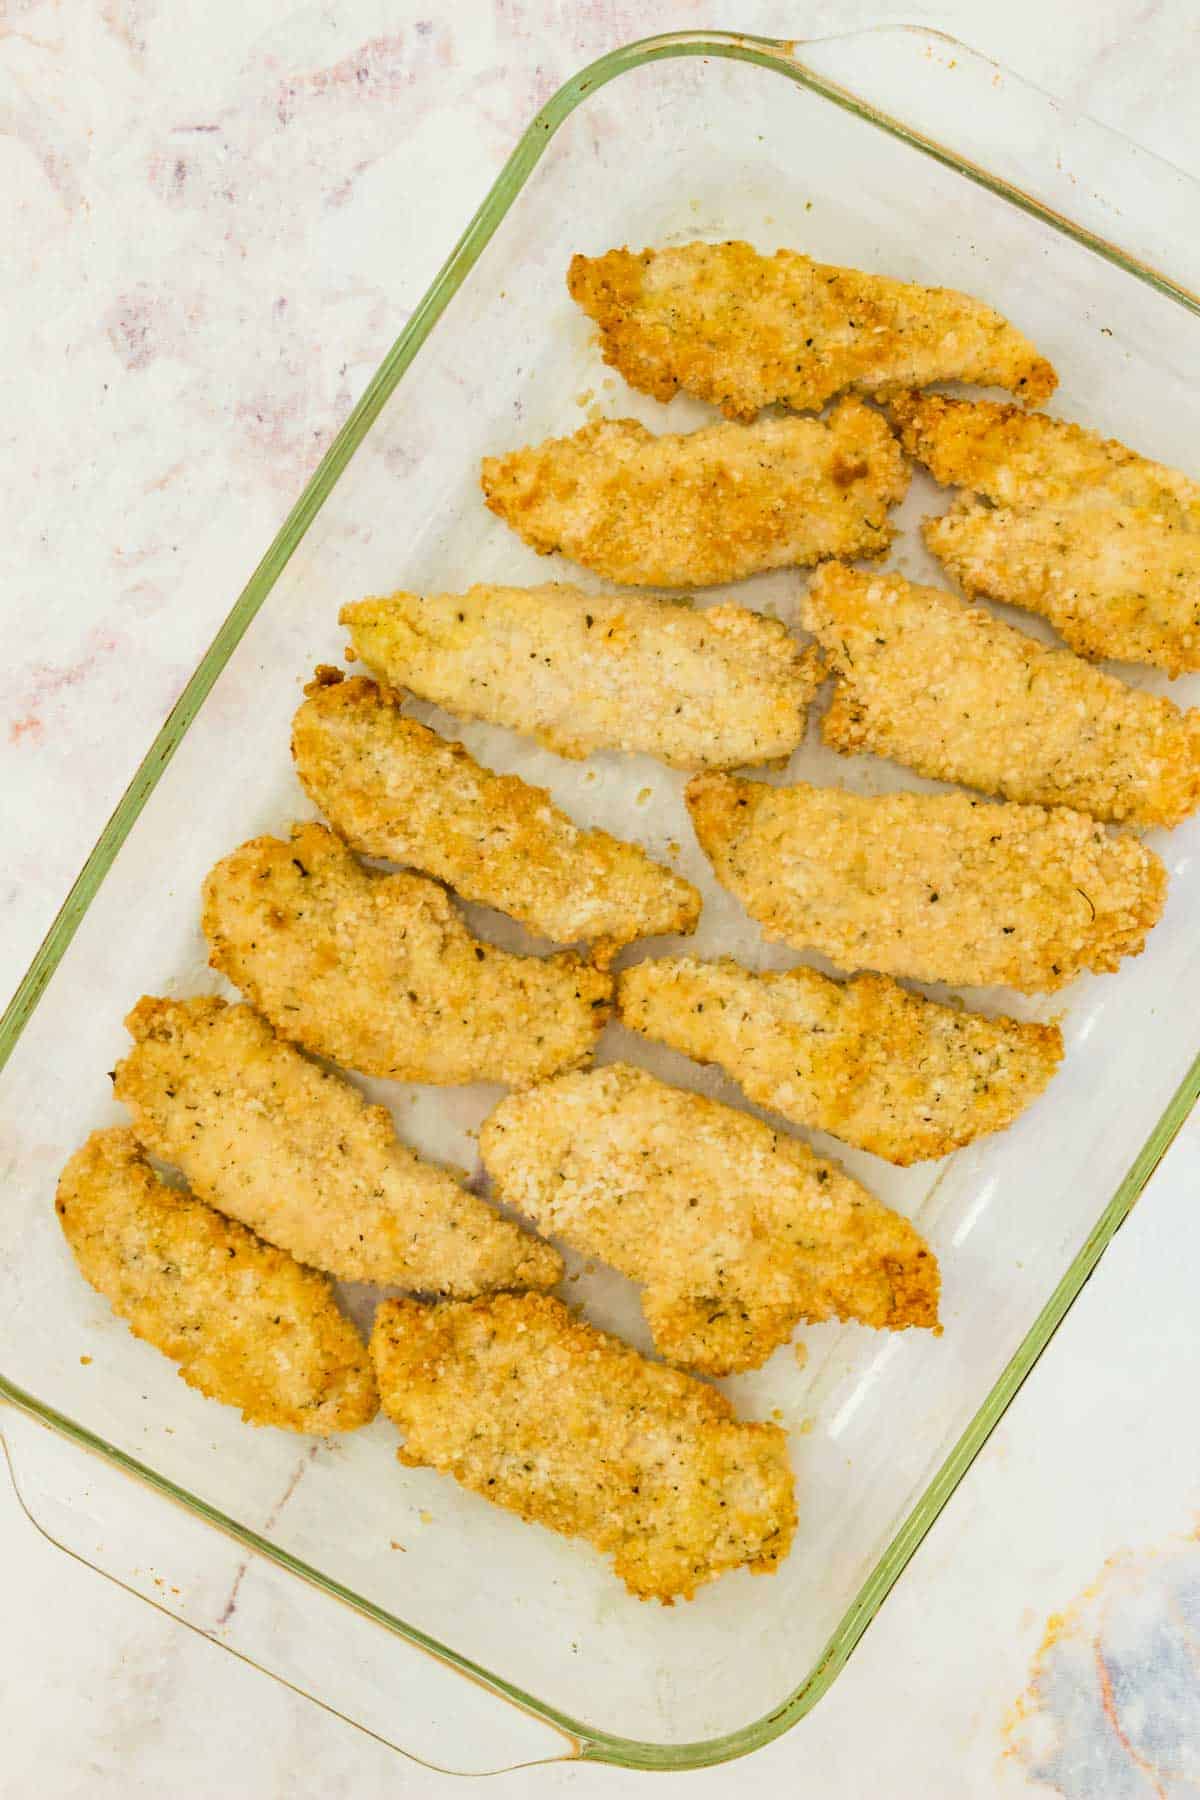 Rows of crispy chicken tenders in a glass baking dish.